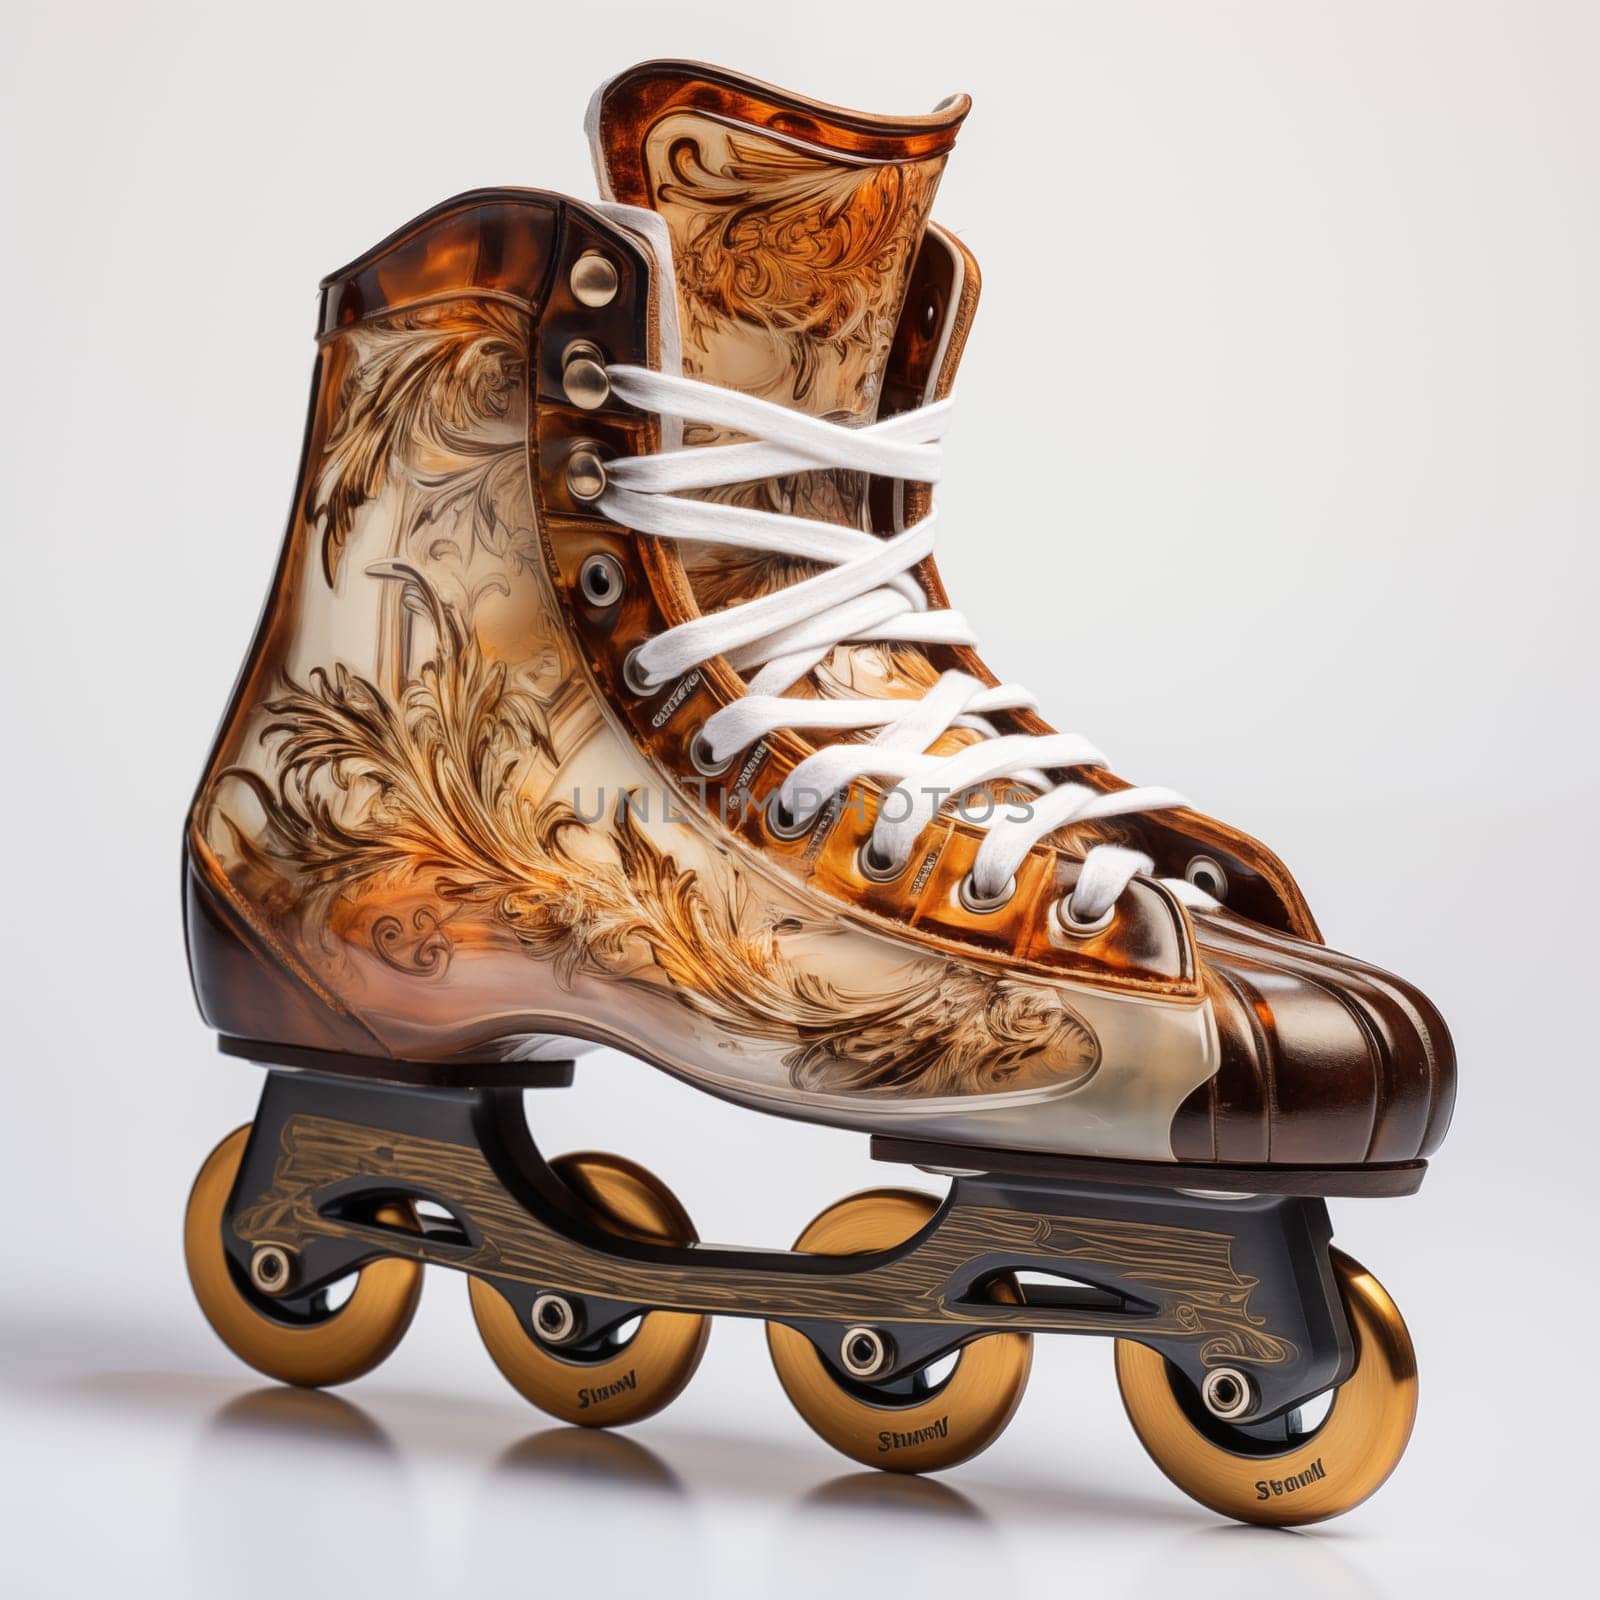 Luxury golden roller skates standing isolated on a white background.